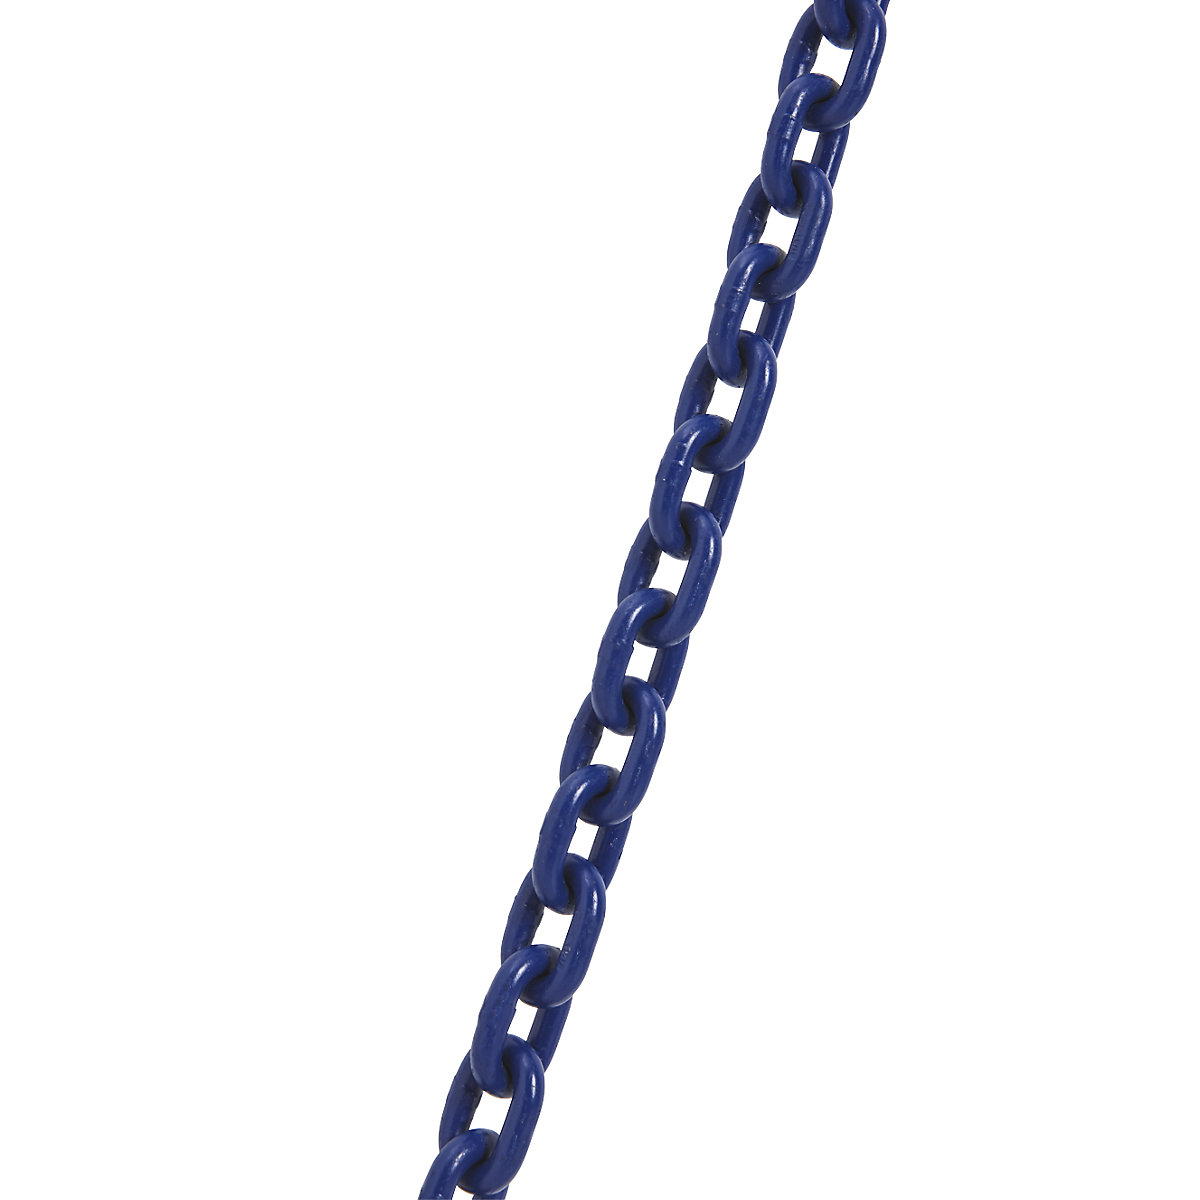 GK10 chain sling, extra cost per m, four leg